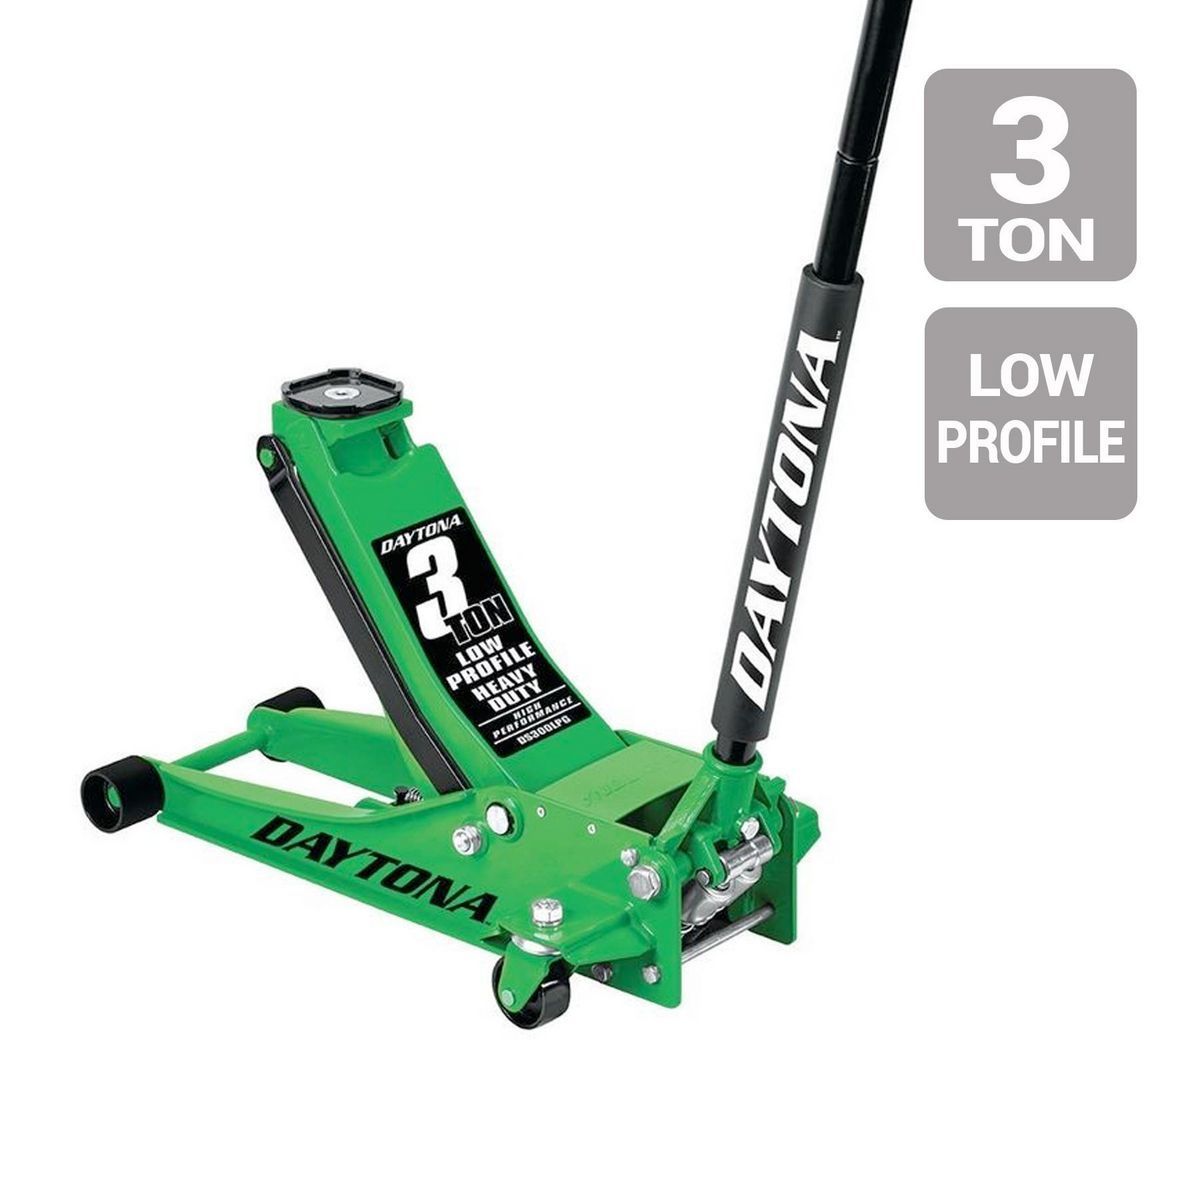 3 ton Low Profile Professional Floor Jack with RAPID PUMP, Green